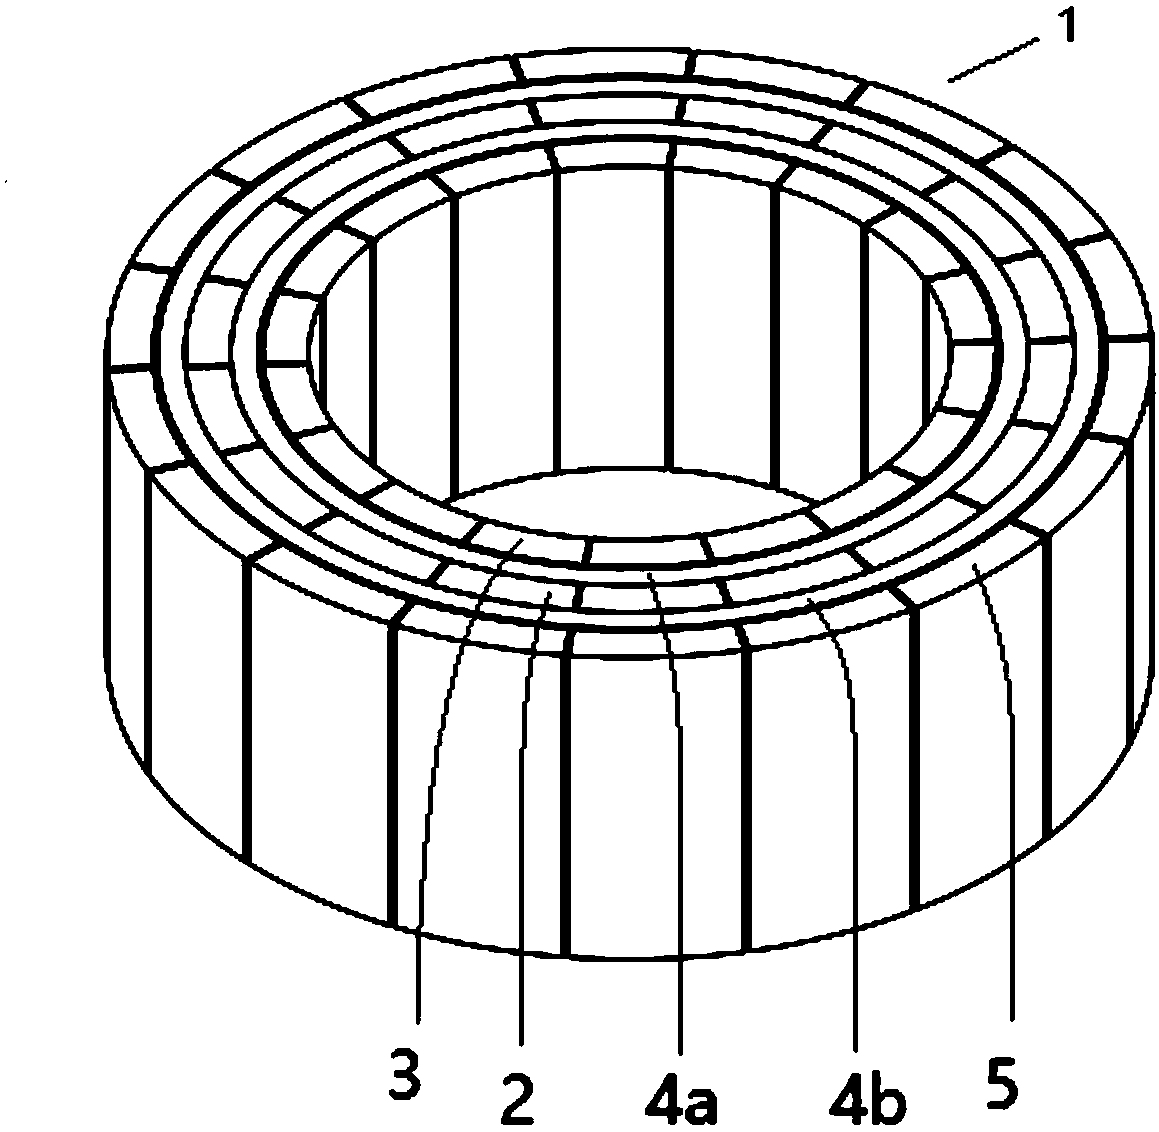 An eddy current damping magnetic spring based on multiple halbach permanent magnet arrays